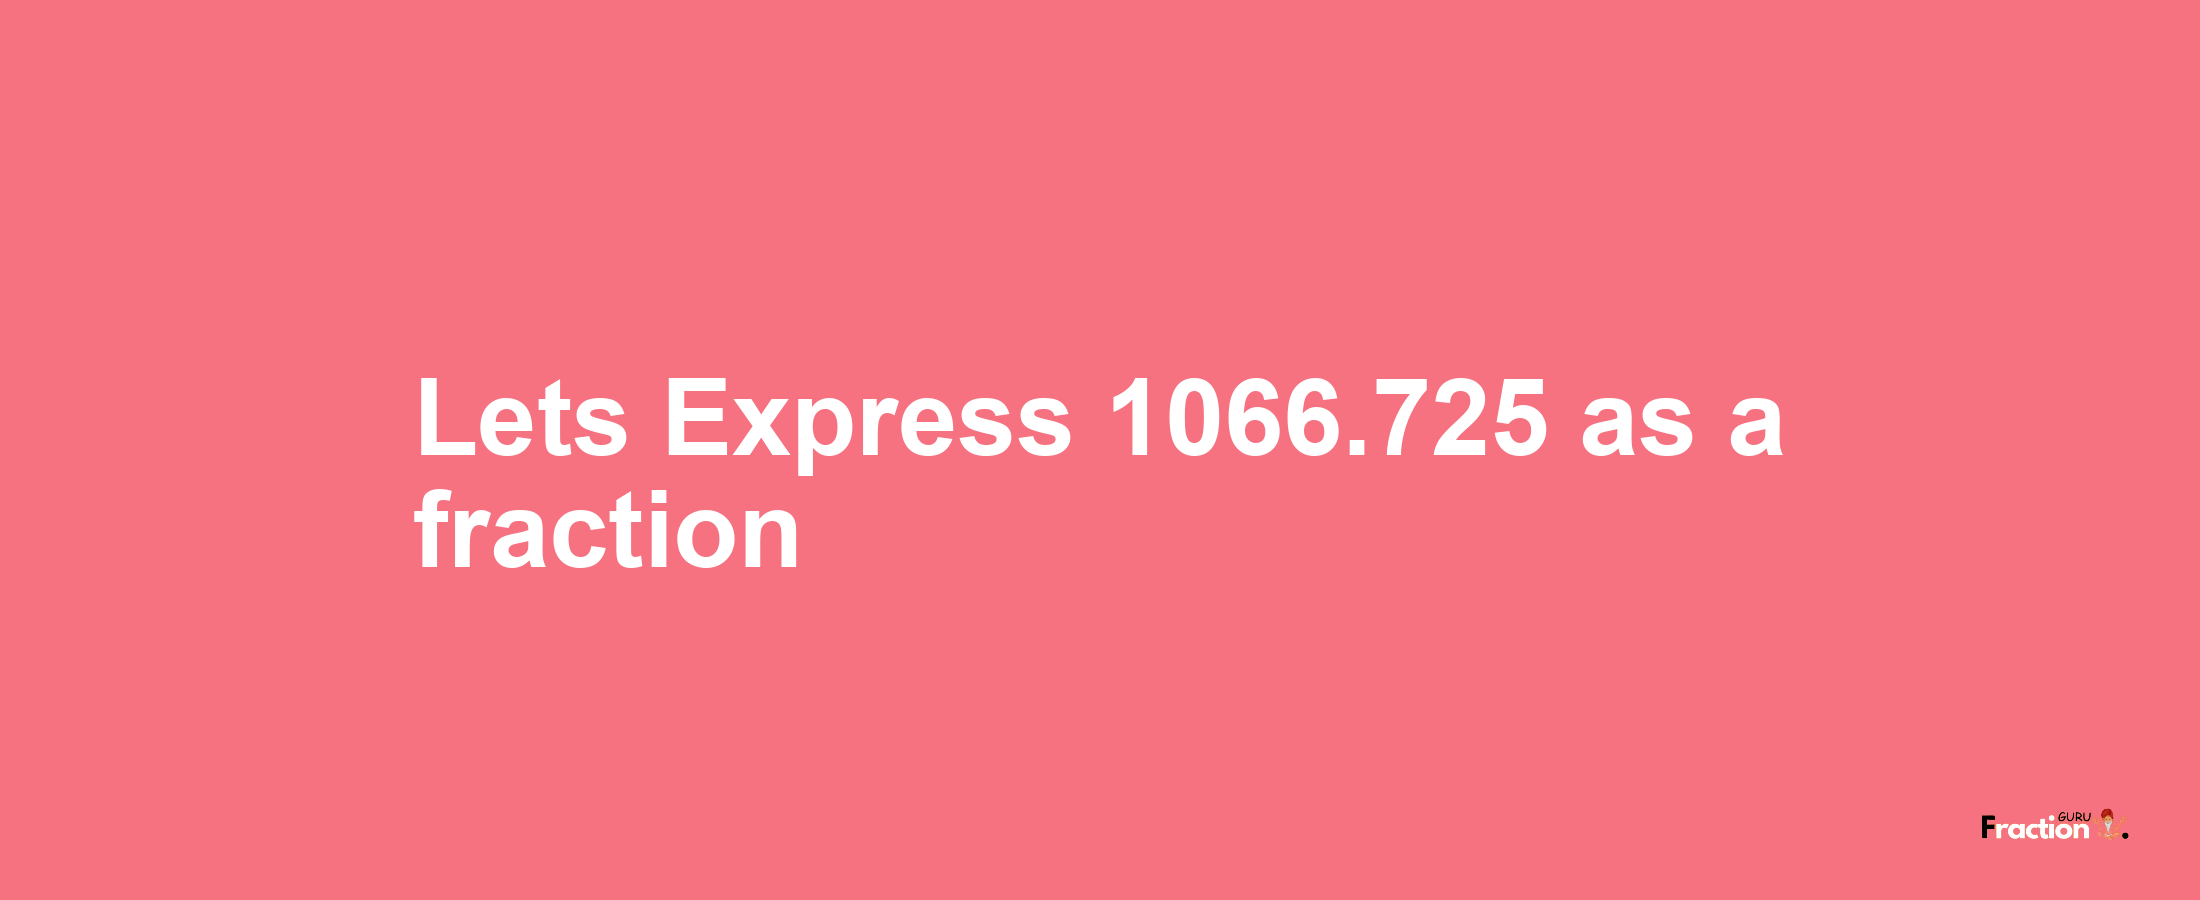 Lets Express 1066.725 as afraction